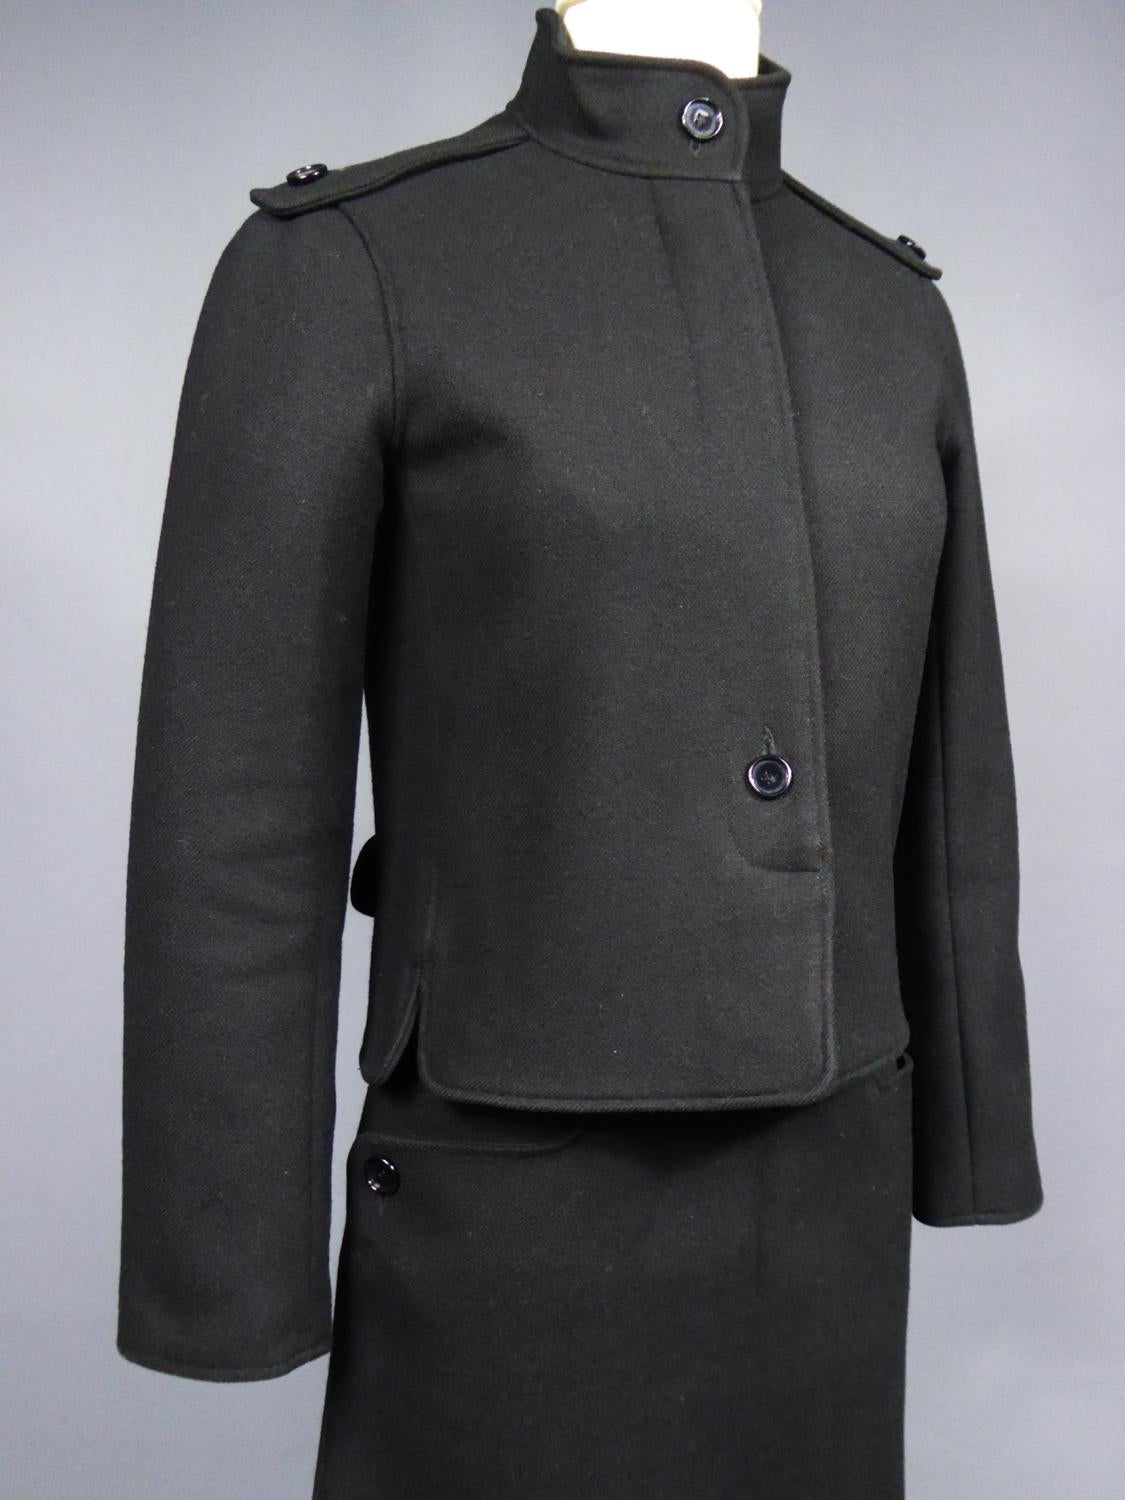 André Courrèges Haute Couture Skirt Suit In Black Wool Circa 1968/1975  For Sale 5